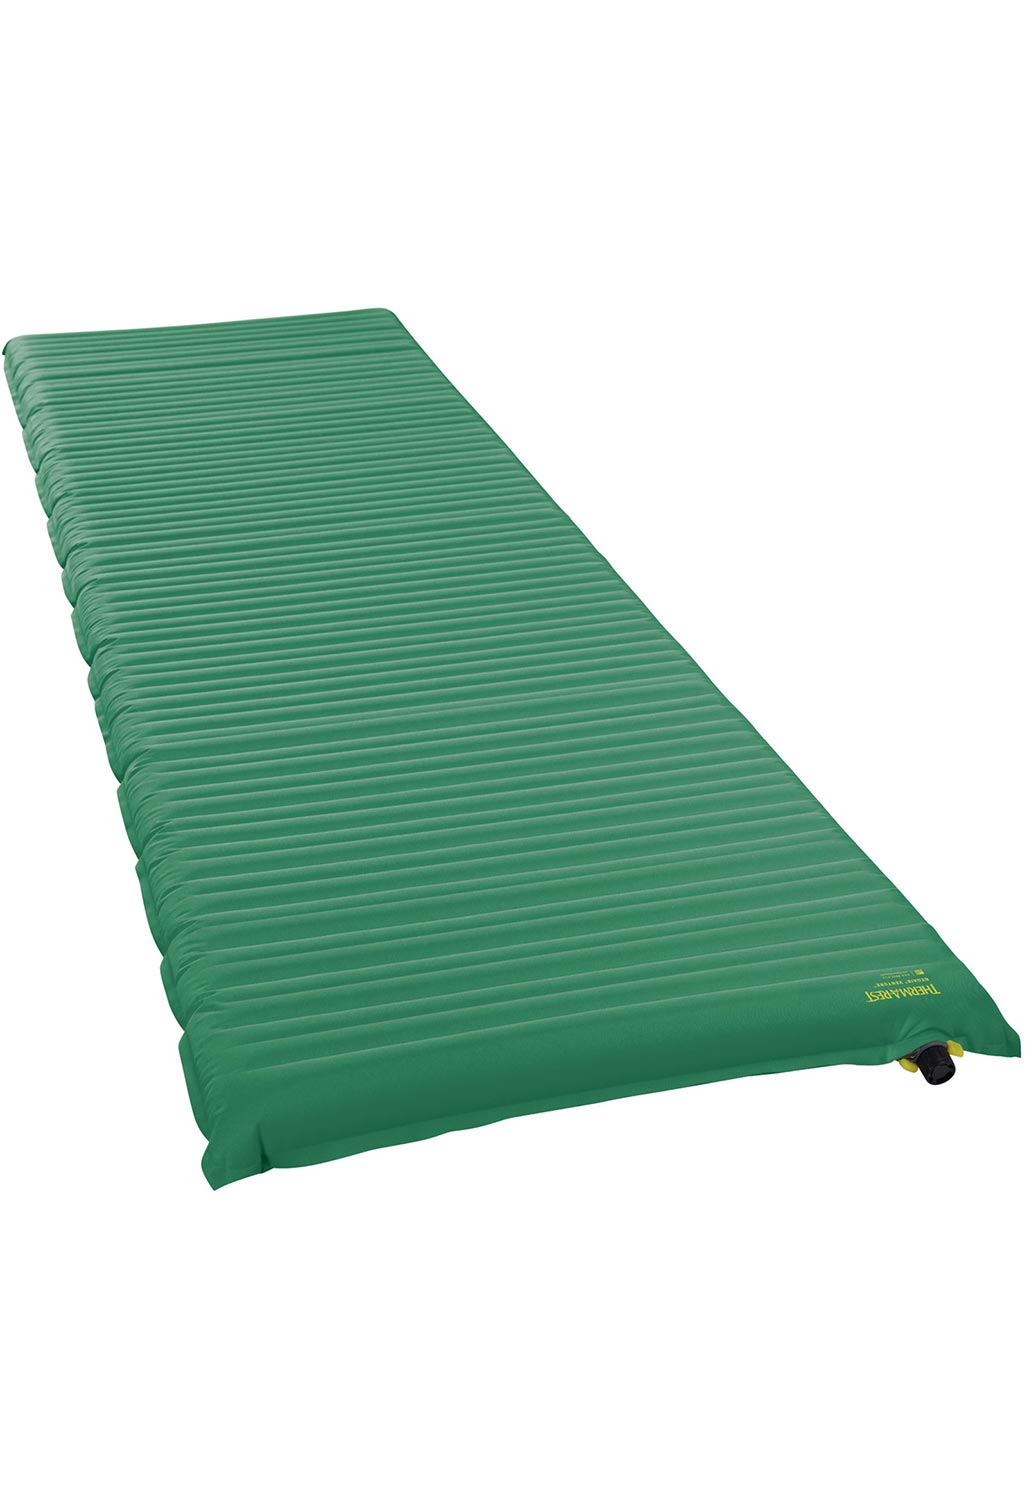 Therm-a-Rest NeoAir Venture Large Camping Mat - Pine